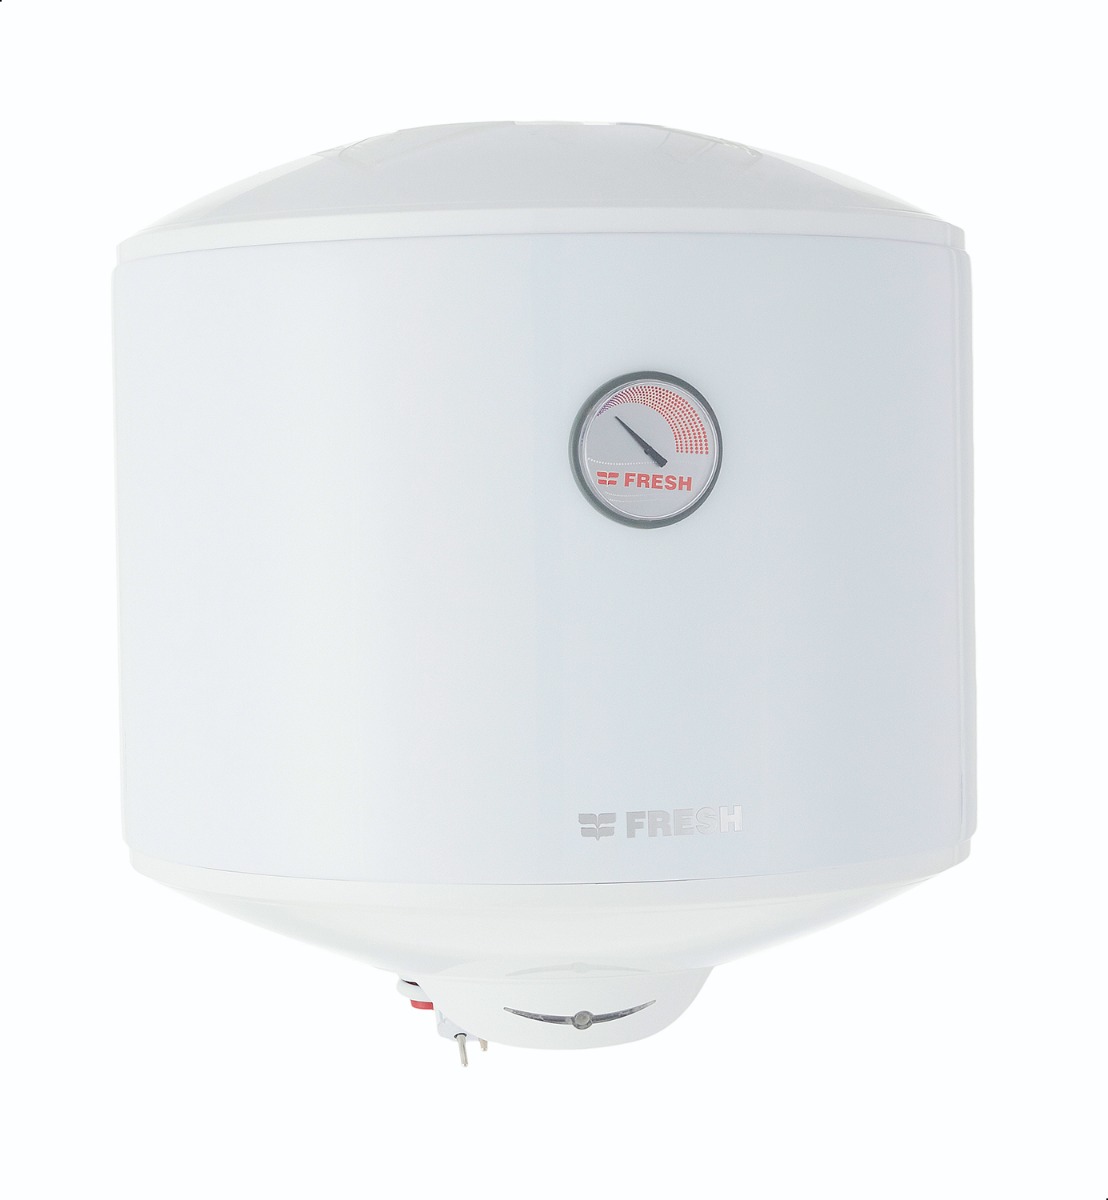 Fresh Relax Electric Water Heater, 40 Liter - White